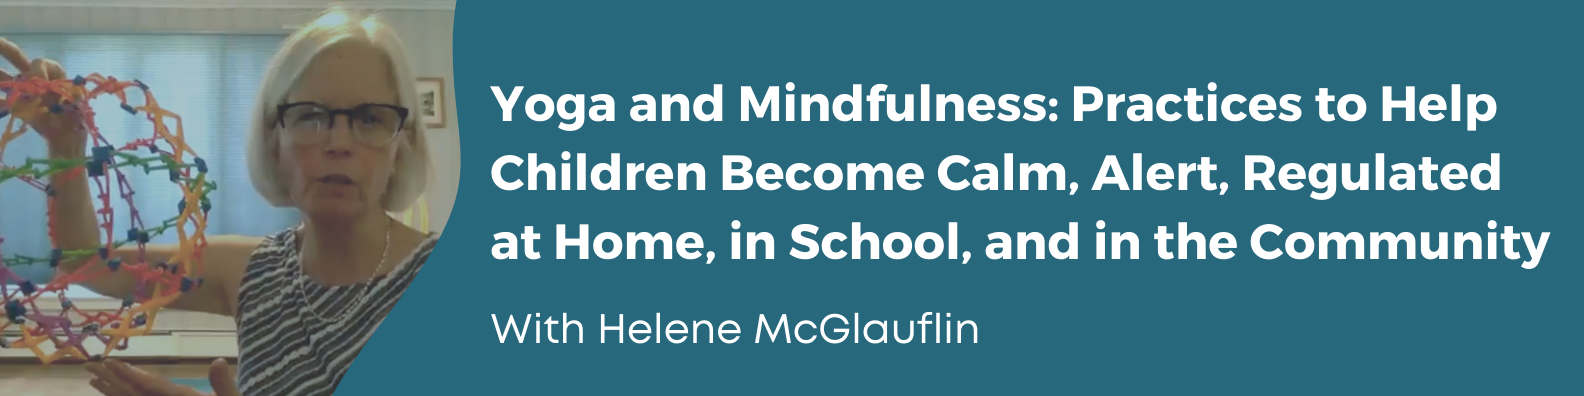 Yoga and Mindfulness: Practices to Help Children Become Calm, Alert, Regulated at Home, in School, and in the Community. With Helene McGlauflin